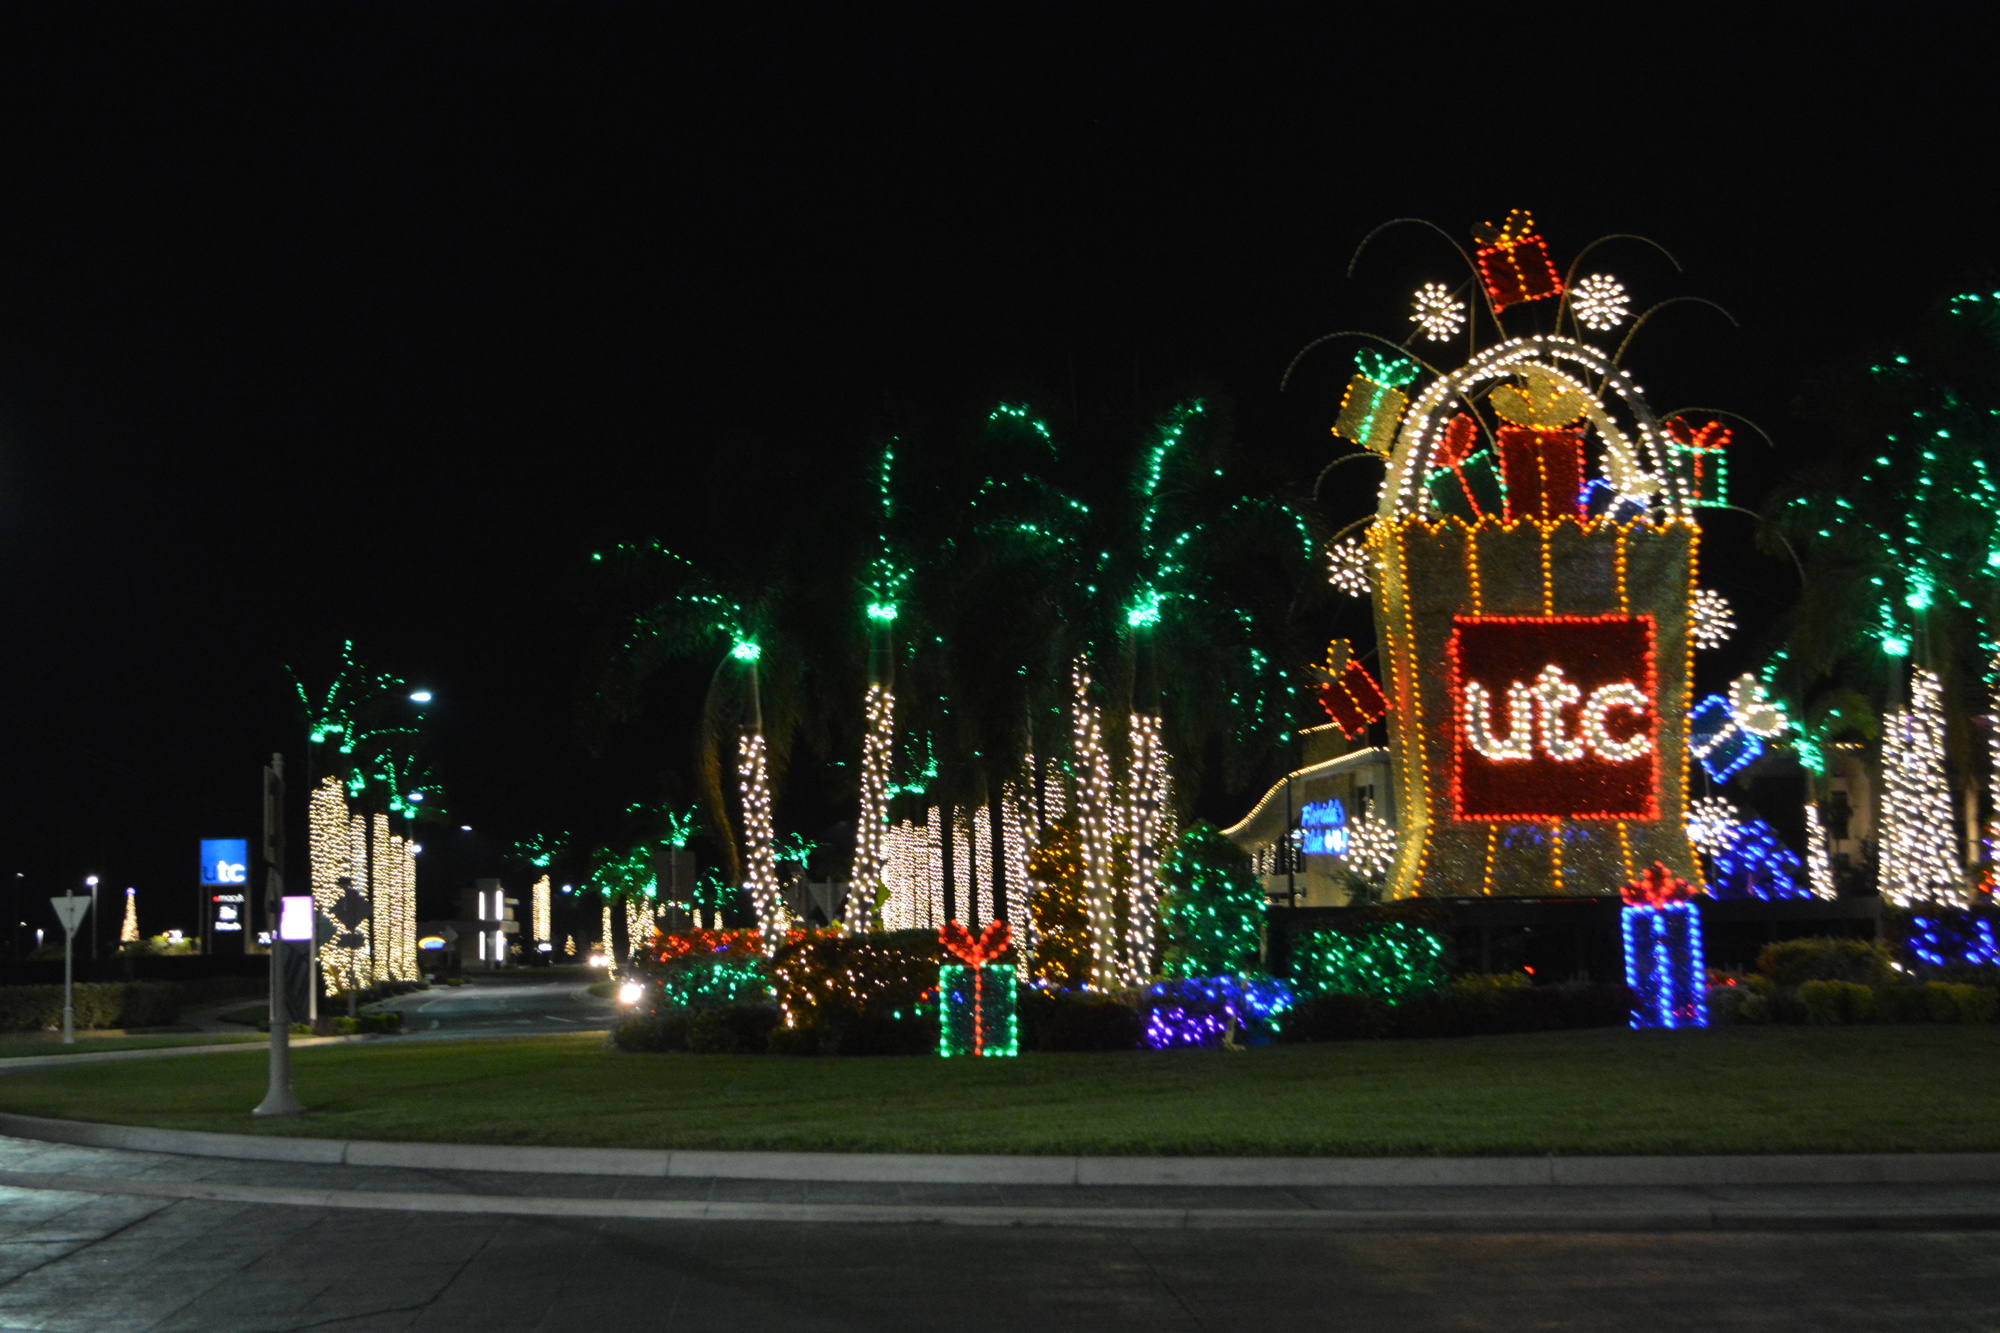 Benderson Development has decorated palm trees and put up other holiday decor all along its property on Cattlemen Road.